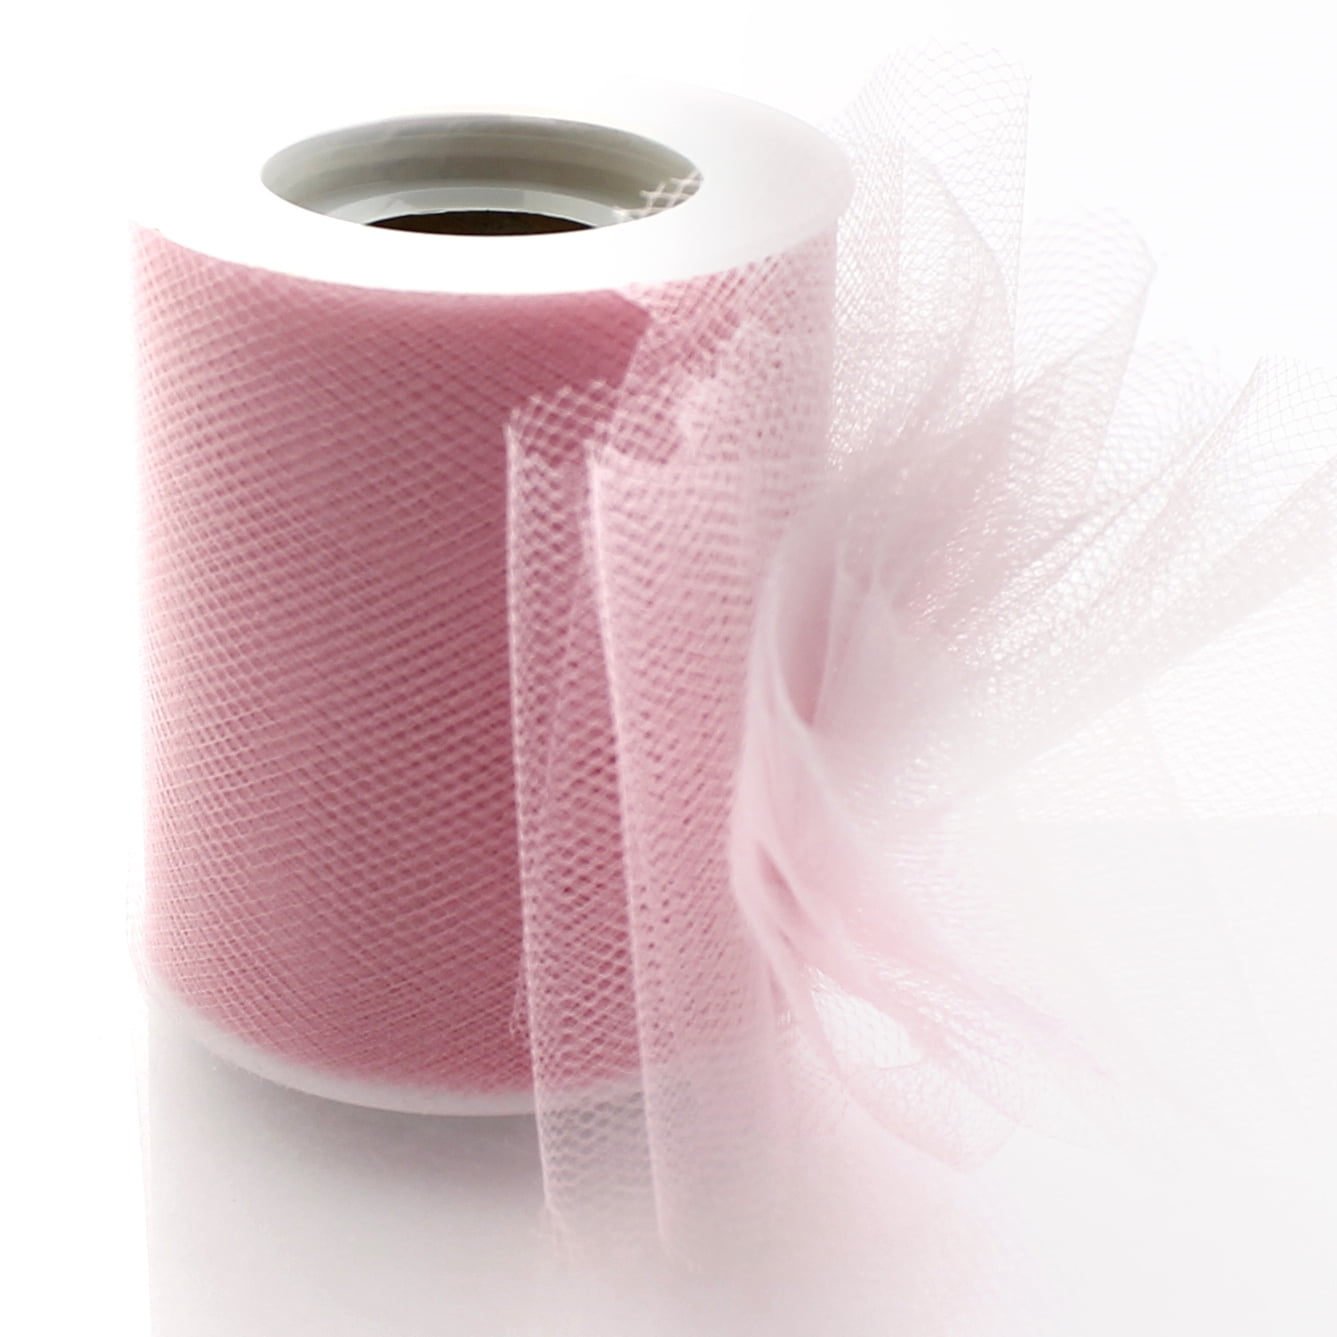 BABCOR Packaging: French Pink Torino Tulle - 6 in. x 25 Yards - Bundle of 4  Rolls